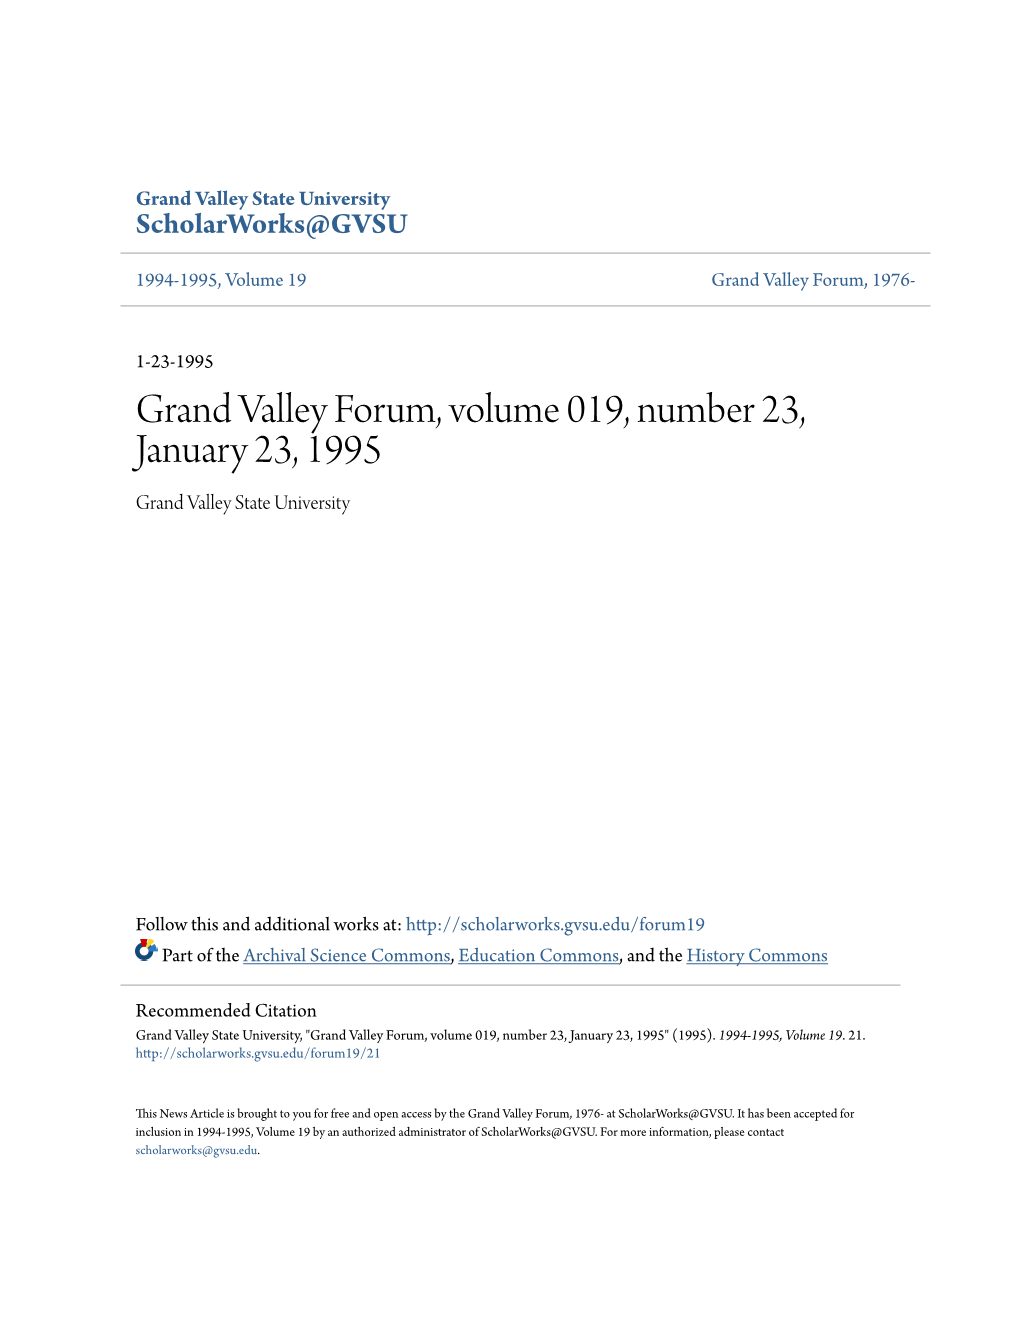 Grand Valley Forum, Volume 019, Number 23, January 23, 1995 Grand Valley State University